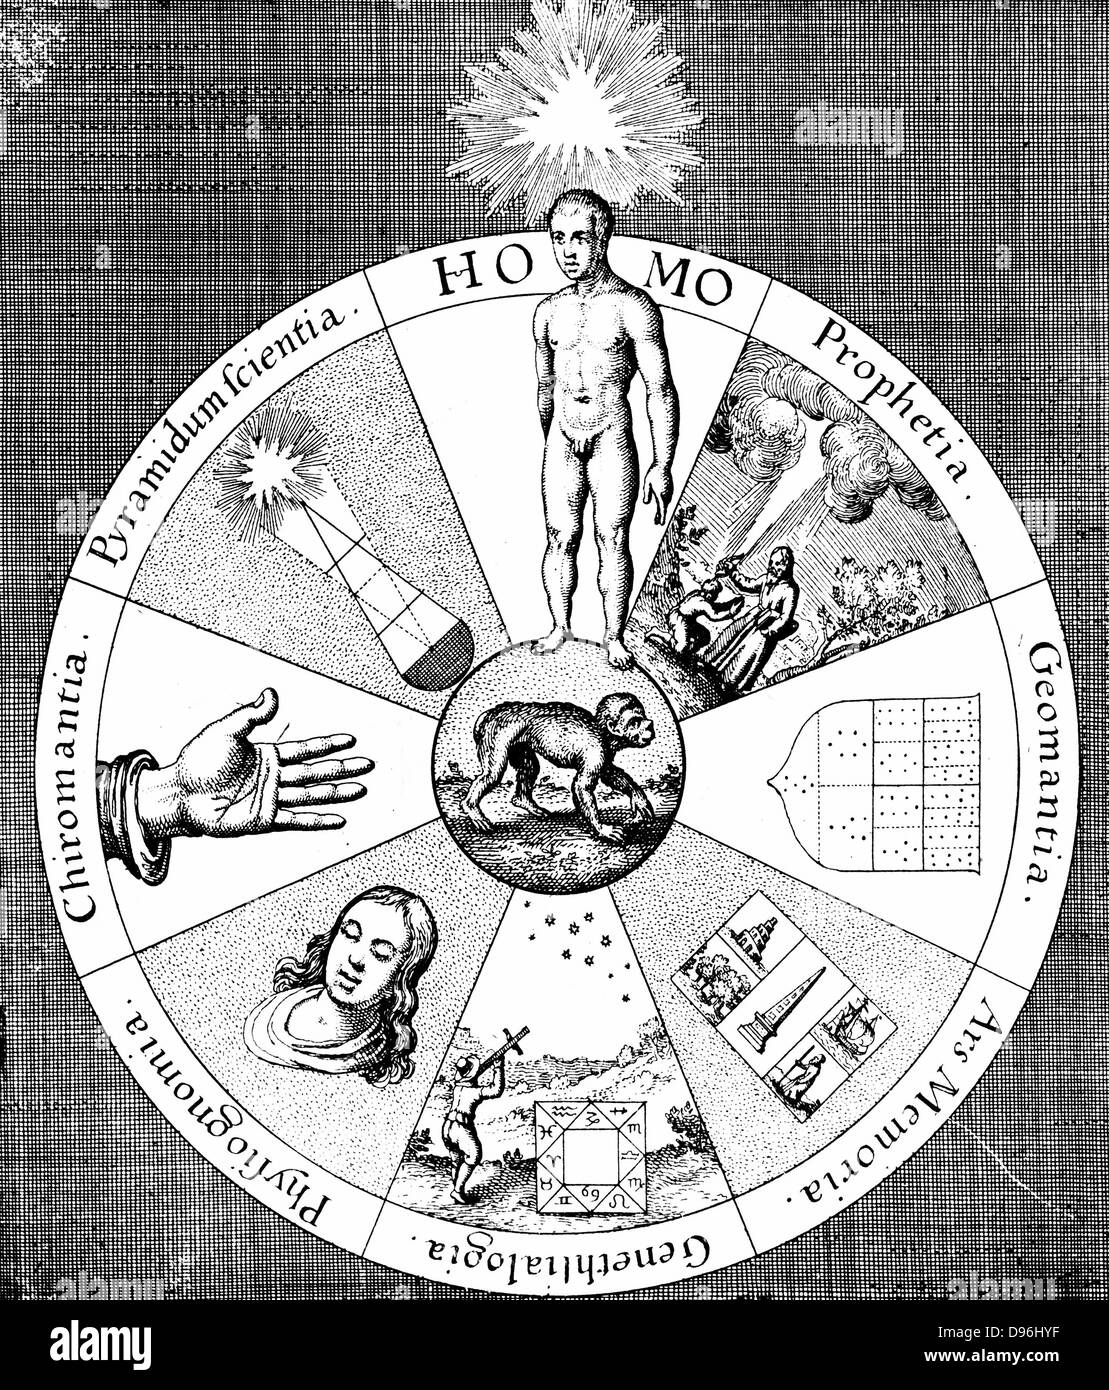 Arts of divination. Illustration shows Prophecy, Geomancy, Mnemonics (memory), Astrology, Physiognomy, Chiromancy and Pyramidology.  From 'Utriusque cosmi ... historia' by Robert Fludd (Oppenheim 1617-1619) Copperplate engraving. Stock Photo